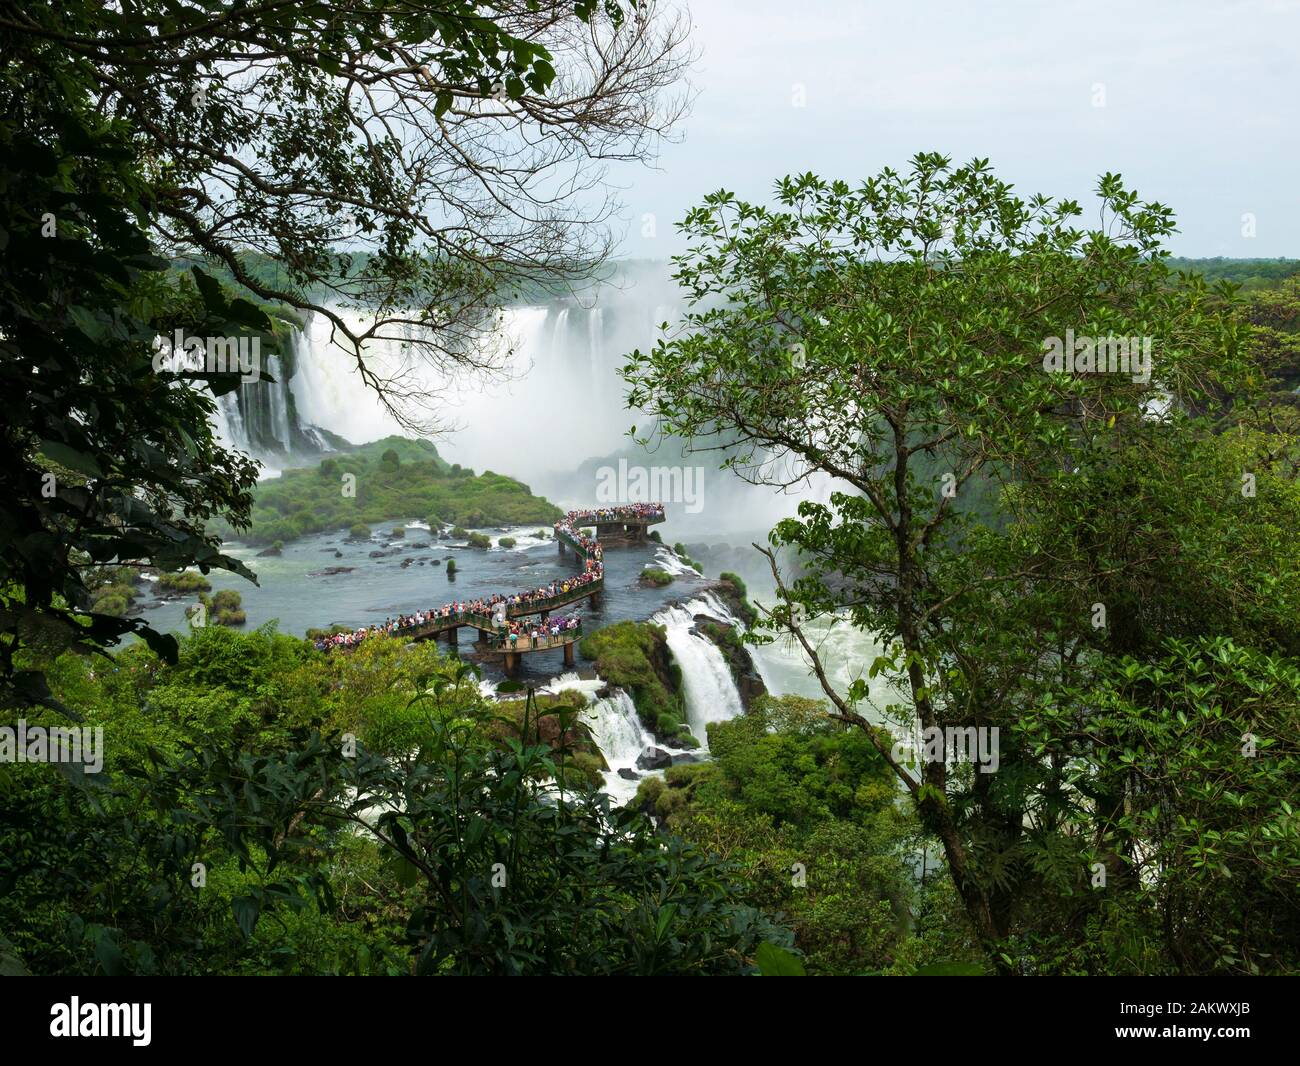 View towards the Iguazu Falls (Iguacu Falls) in Argentina as seen from the Brazilian side of the falls. Iguacu Falls National Park, Brazil. Stock Photo